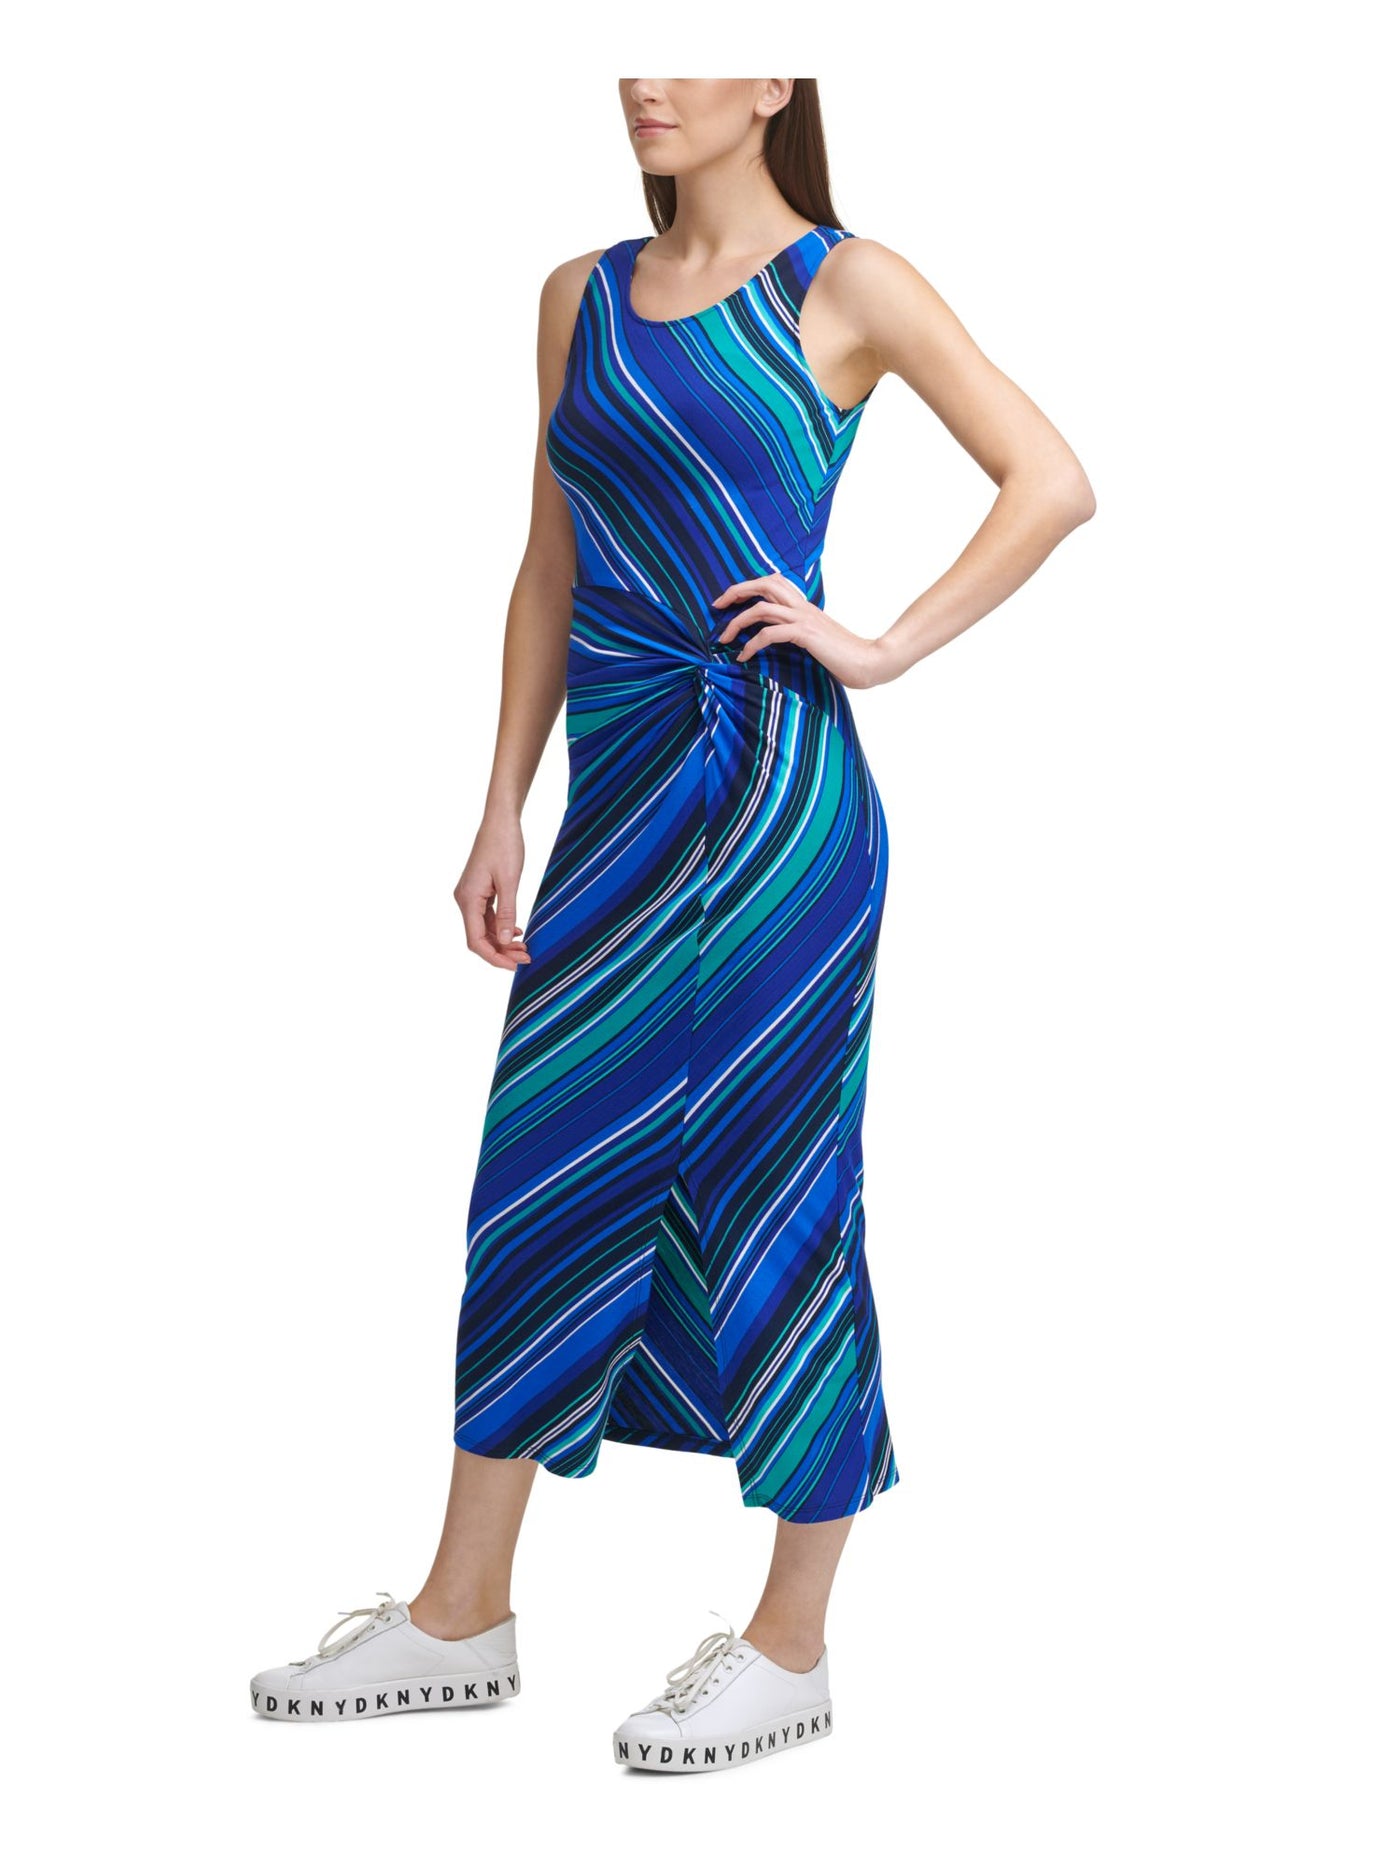 DKNY Womens Blue Slitted Striped Sleeveless Scoop Neck Midi Fit + Flare Dress XL